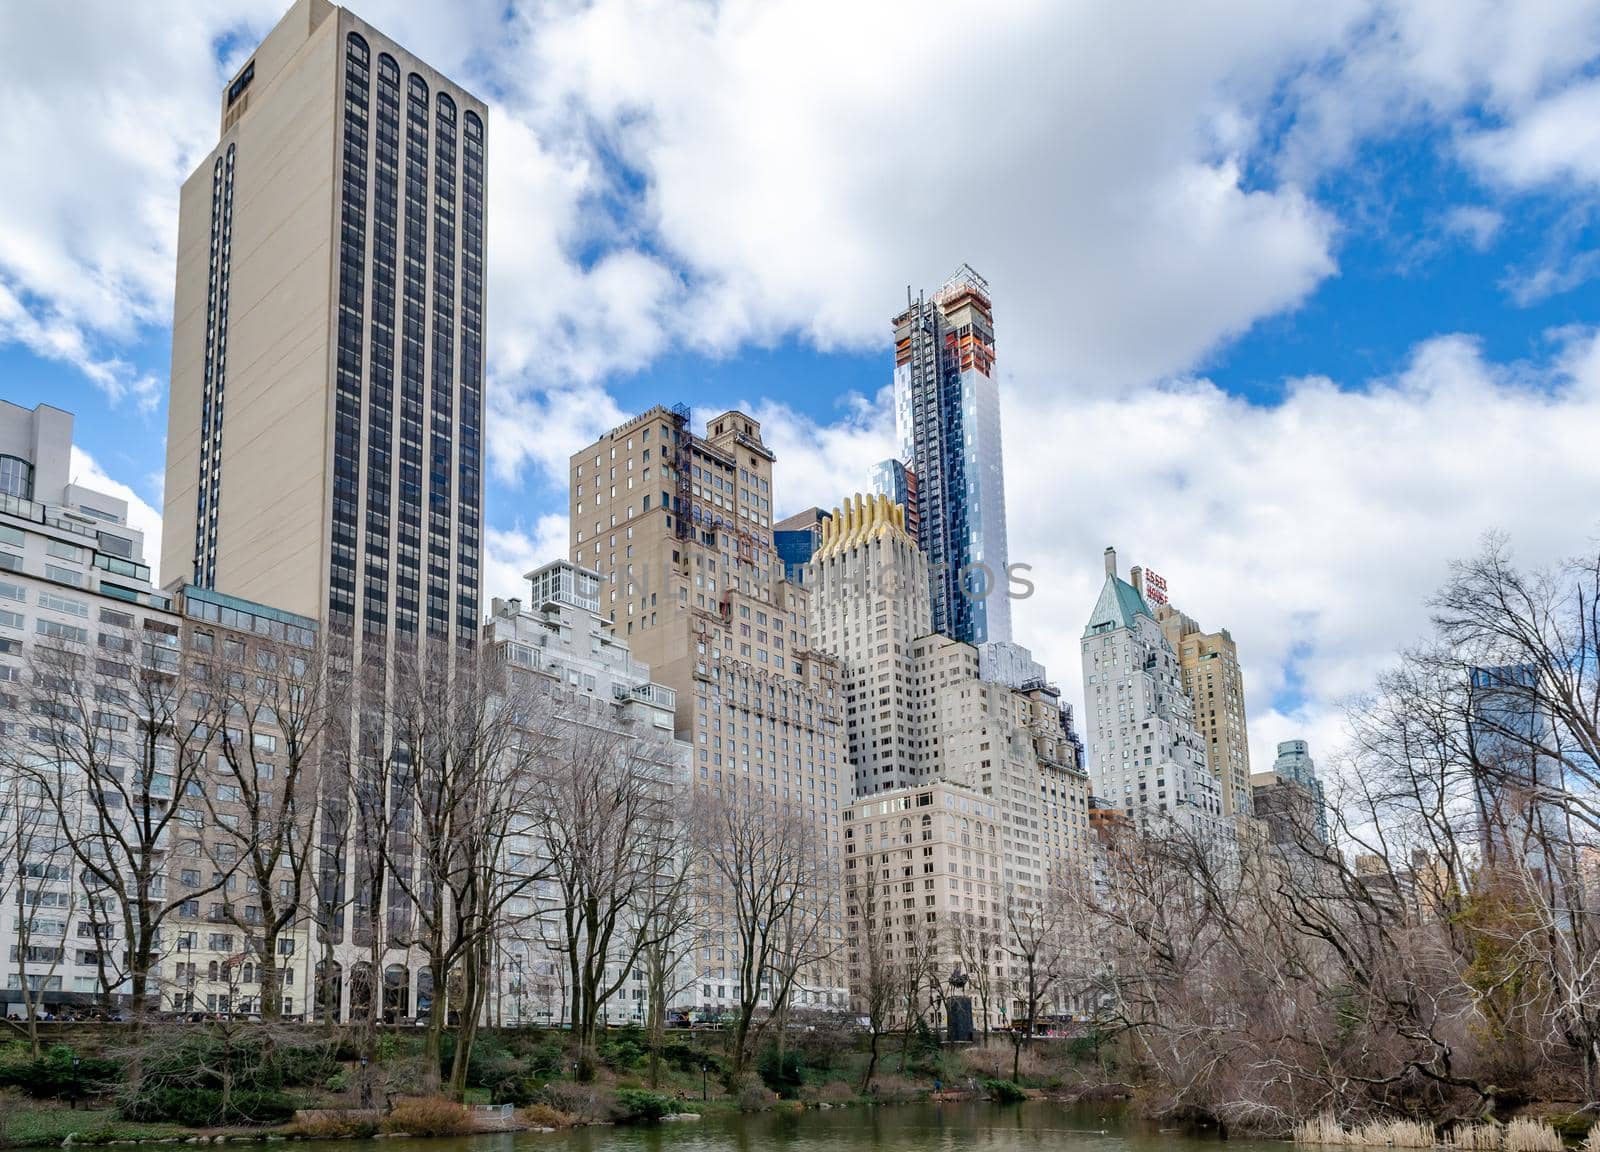 Skyline of Manhattan with Essex House and other Skyscraper, The Pond at Central Park Lake in forefront, view from low angle, cloudy sky during winter, horizontal